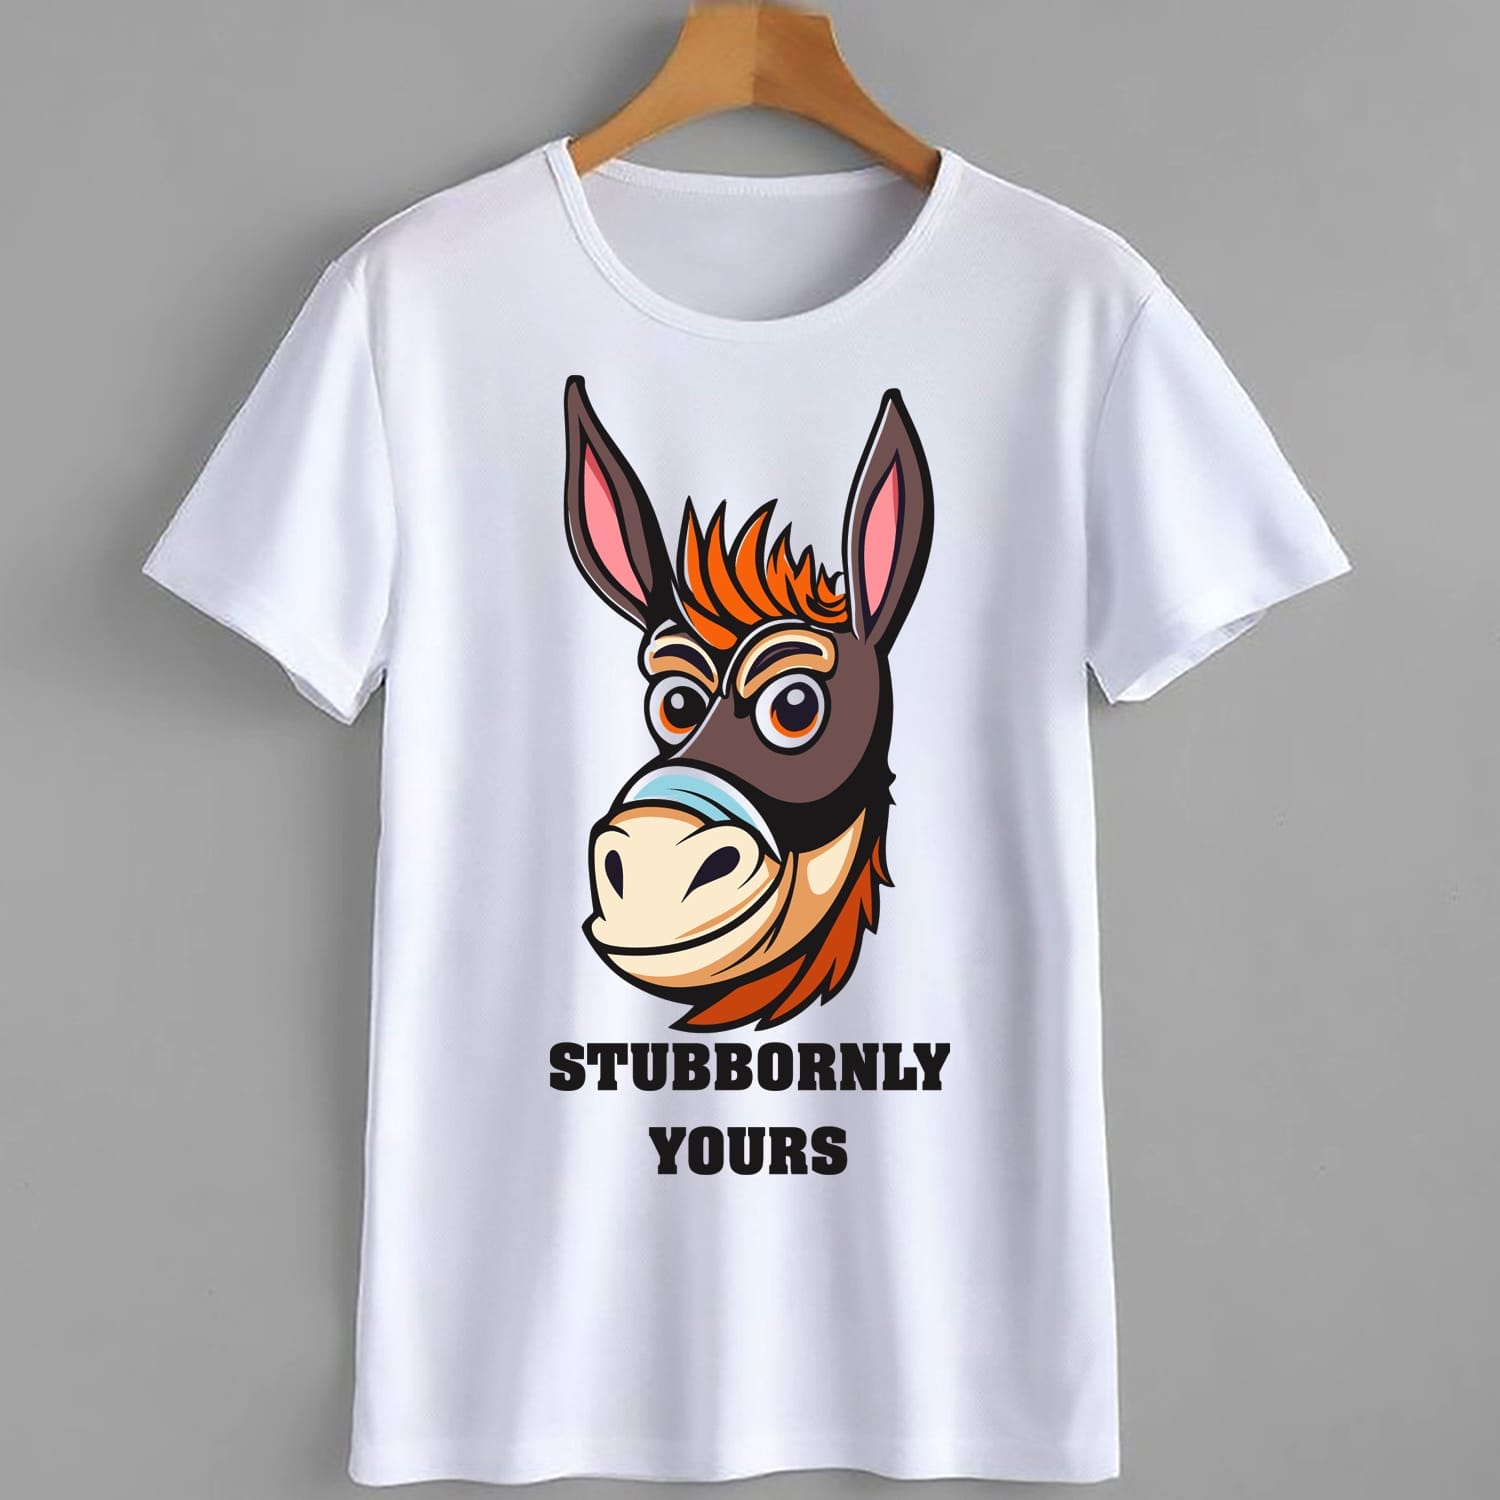 Stubbornly Yours - Funny Donkey T-Shirt Design